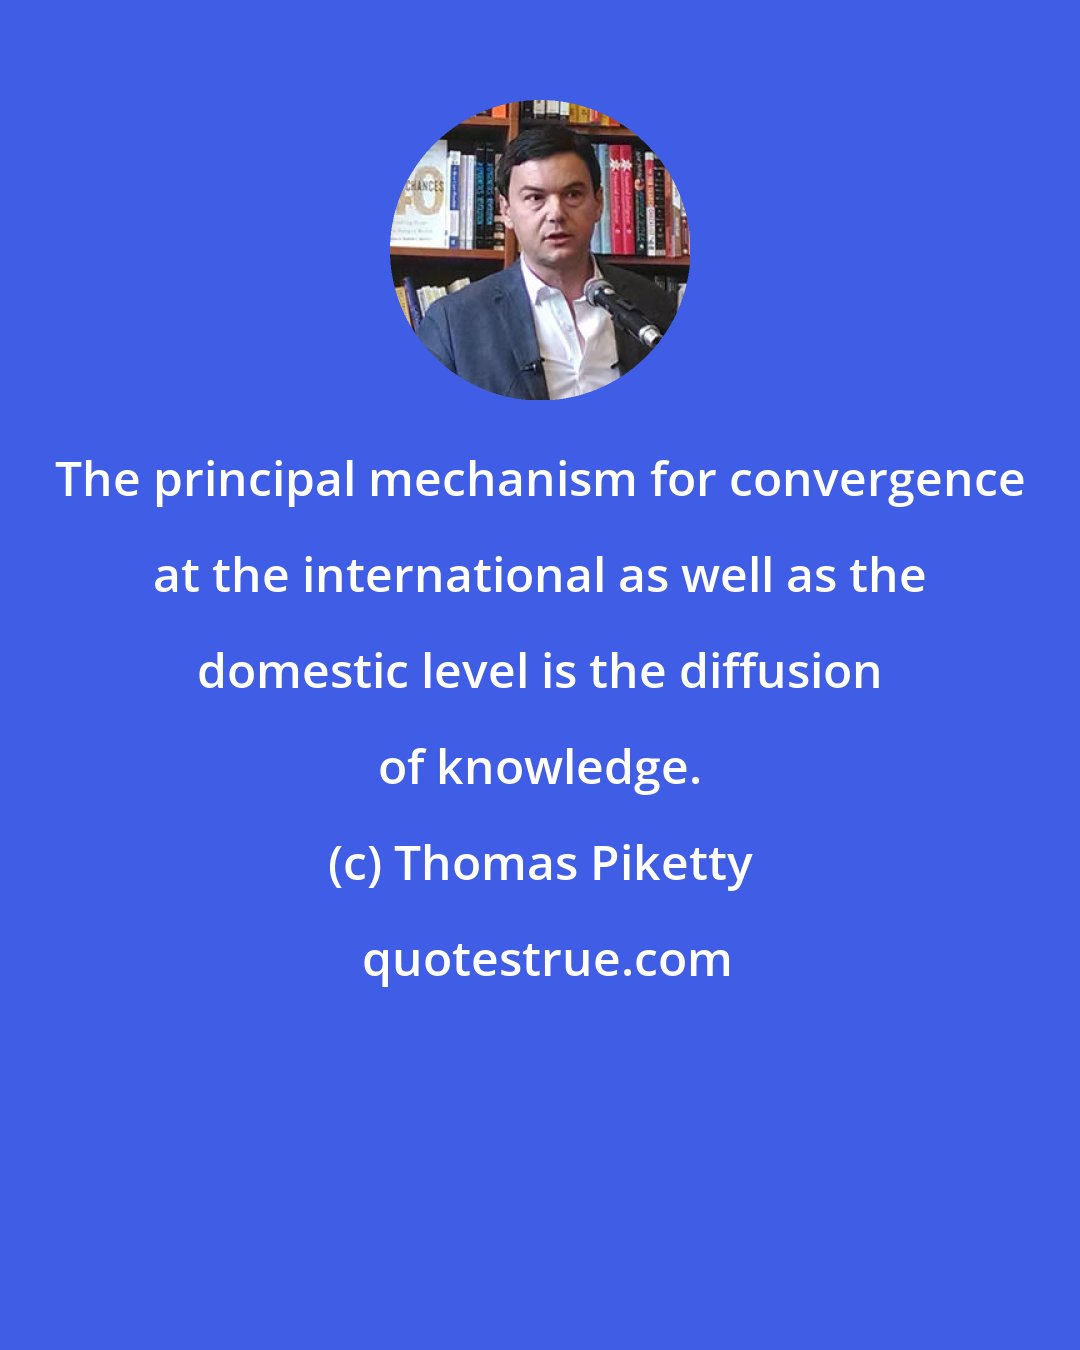 Thomas Piketty: The principal mechanism for convergence at the international as well as the domestic level is the diffusion of knowledge.